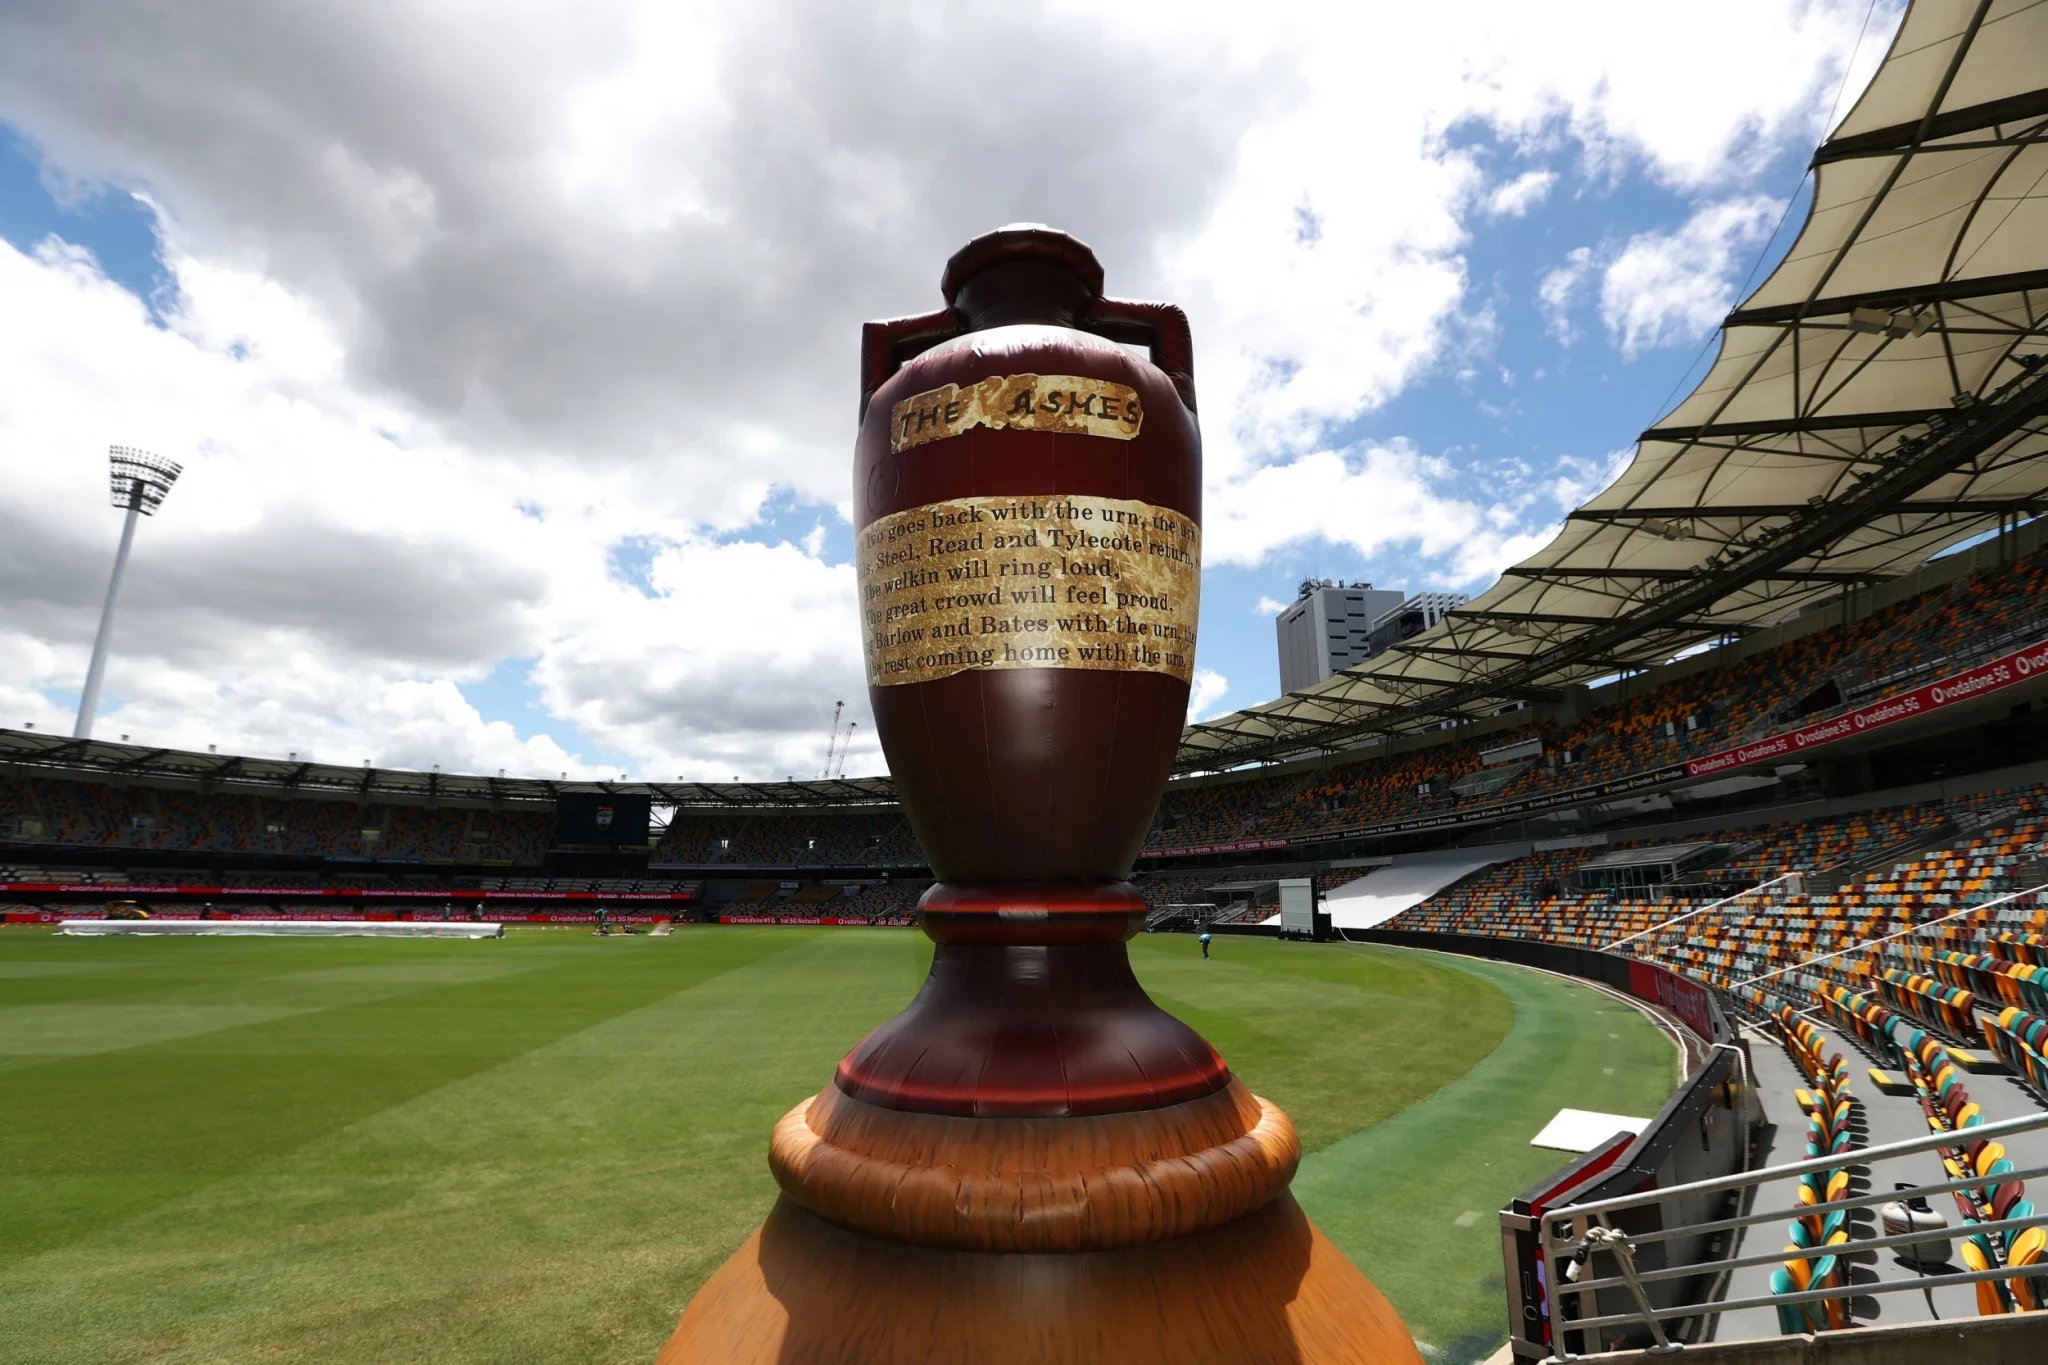 Australia and England have been playing each other in Test cricket since 1882 but expectations have rarely been higher for an Ashes series than this year ©Getty Images